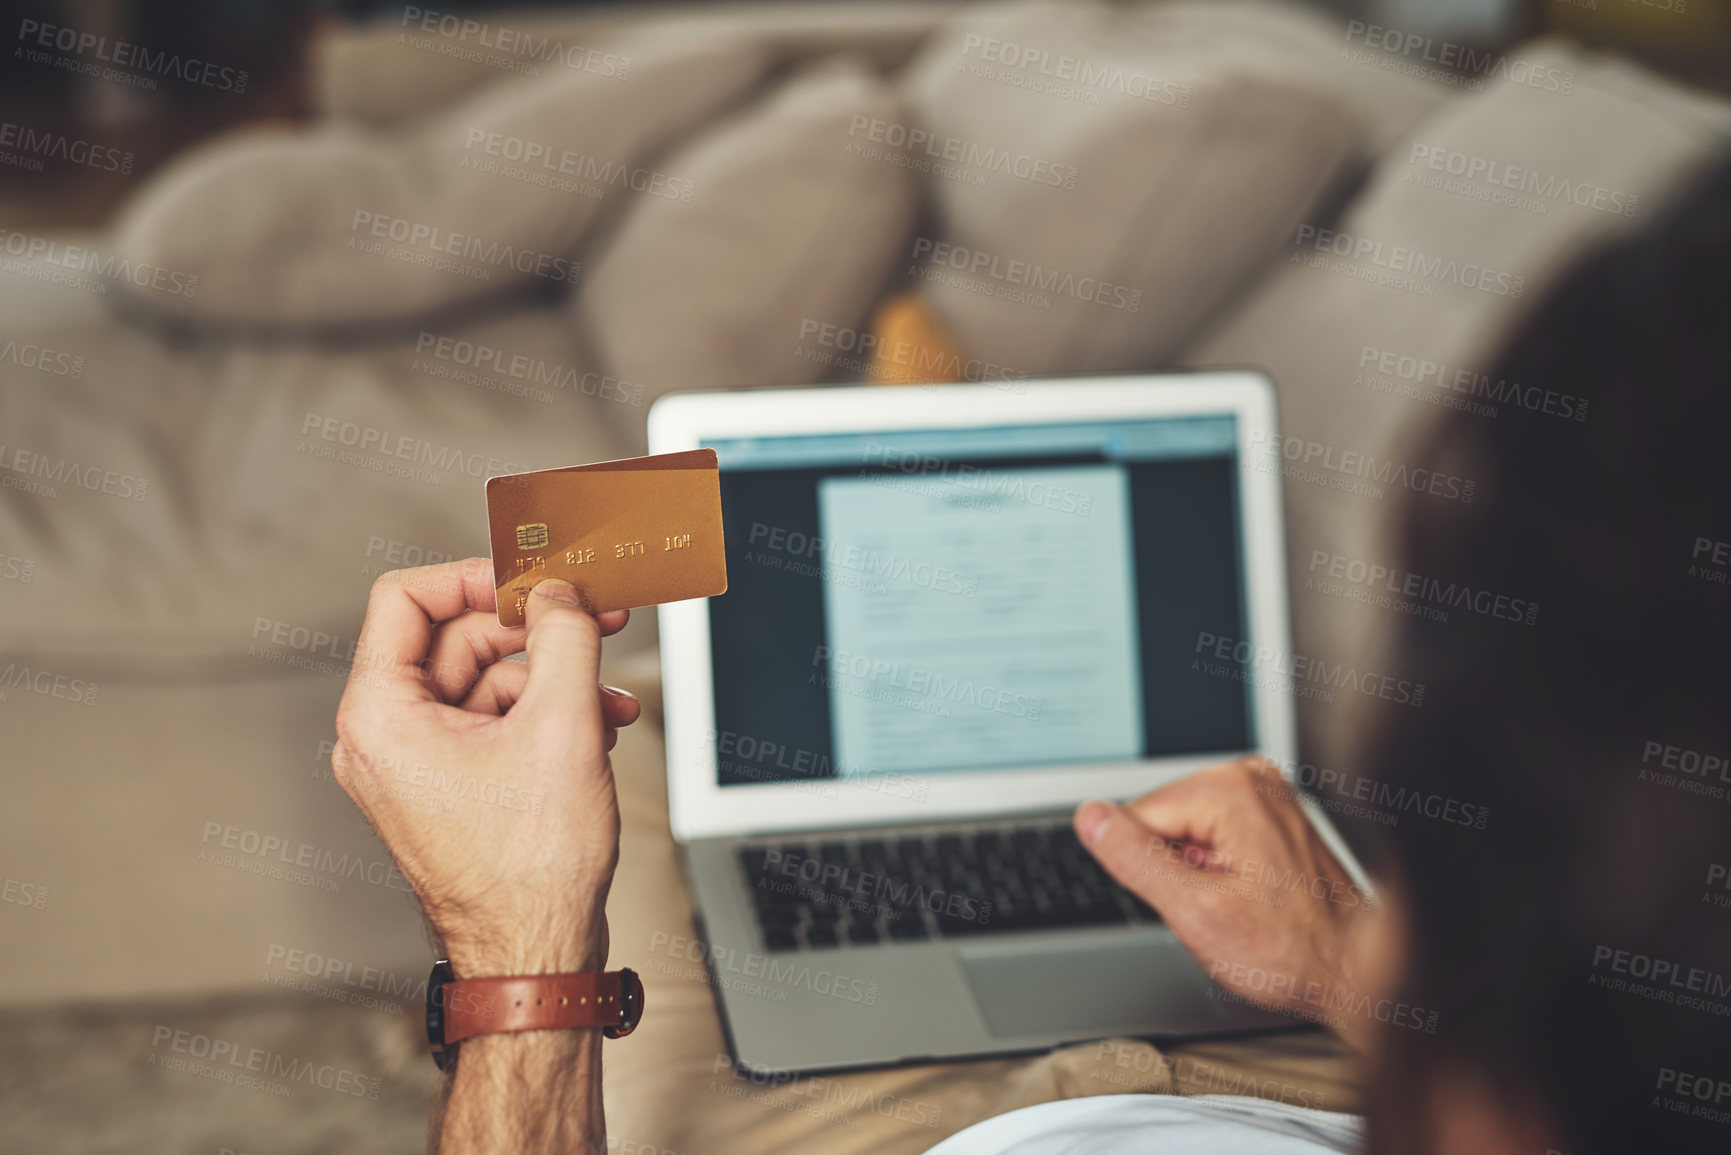 Buy stock photo Shot of an unrecognizable man using his laptop and credit card while relaxing on a couch at home